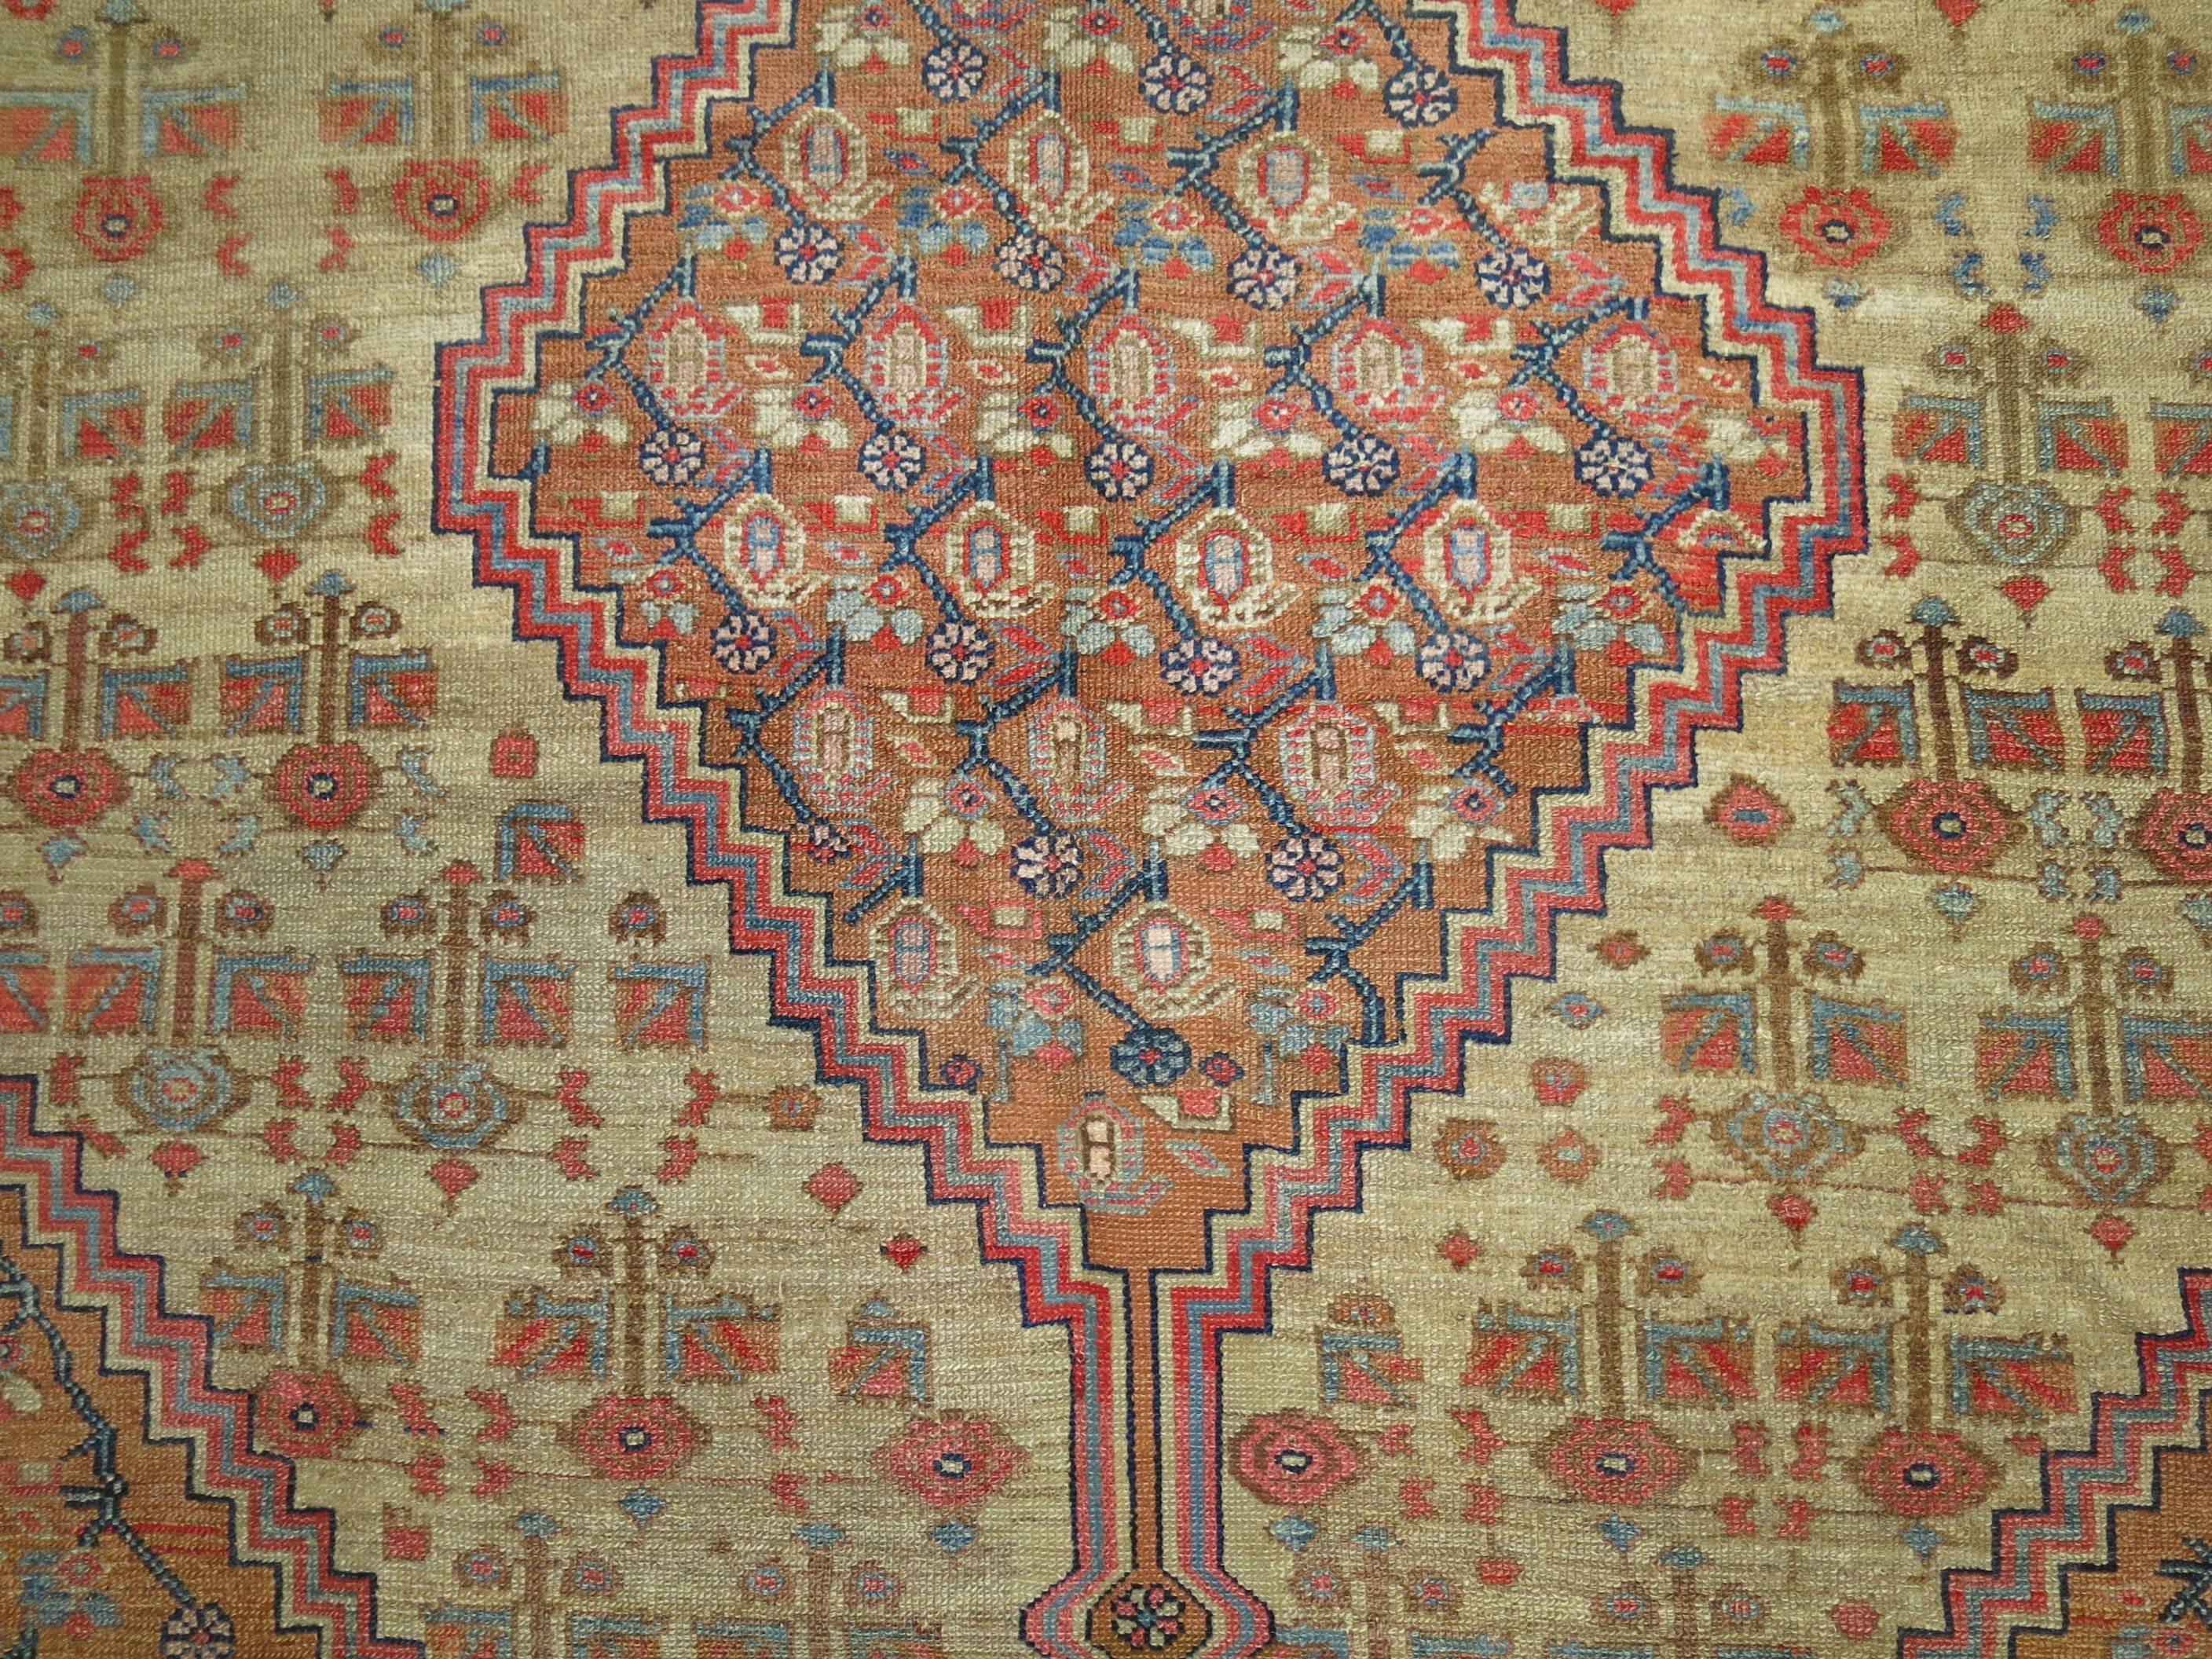 Rare room size Camel Field Persian Serab rug with characteristics stemming from 19th century Persian Bakshaish rugs. The harmonious colors, skillful geometry and weavers craftsmanship make this rug an absolute work of art.

The best antique rugs